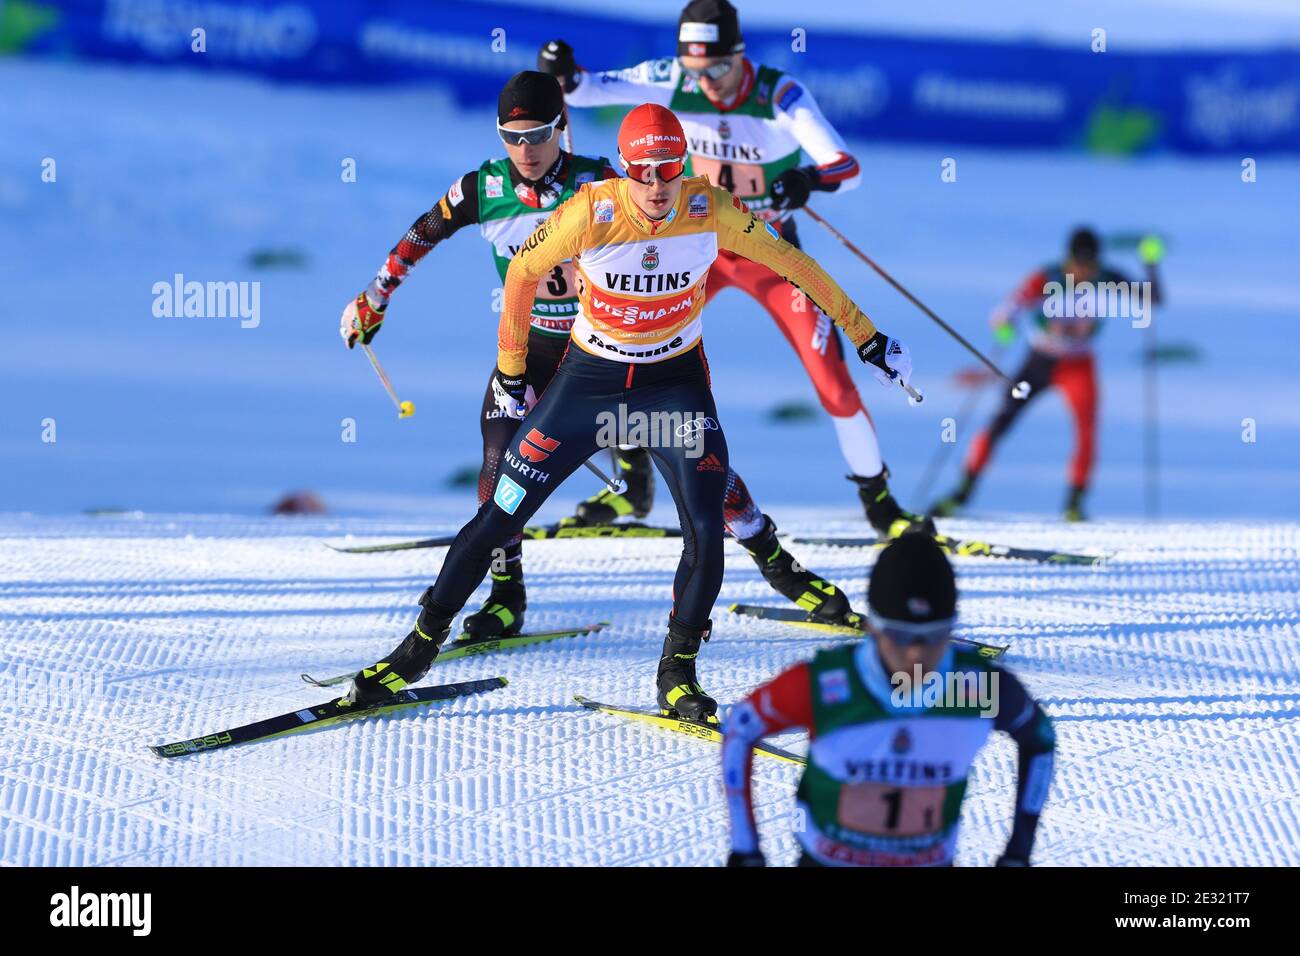 Val Di Fiemme, Trentino, Italien. 16. Januar 2021; Val Di Fiemme, Predazzo, Trentino, Italien; International Ski Federation Nordic Combined Team Sprint World Cup, Eric Frenzel (GER) Credit: Action Plus Sports Images/Alamy Live News Stockfoto